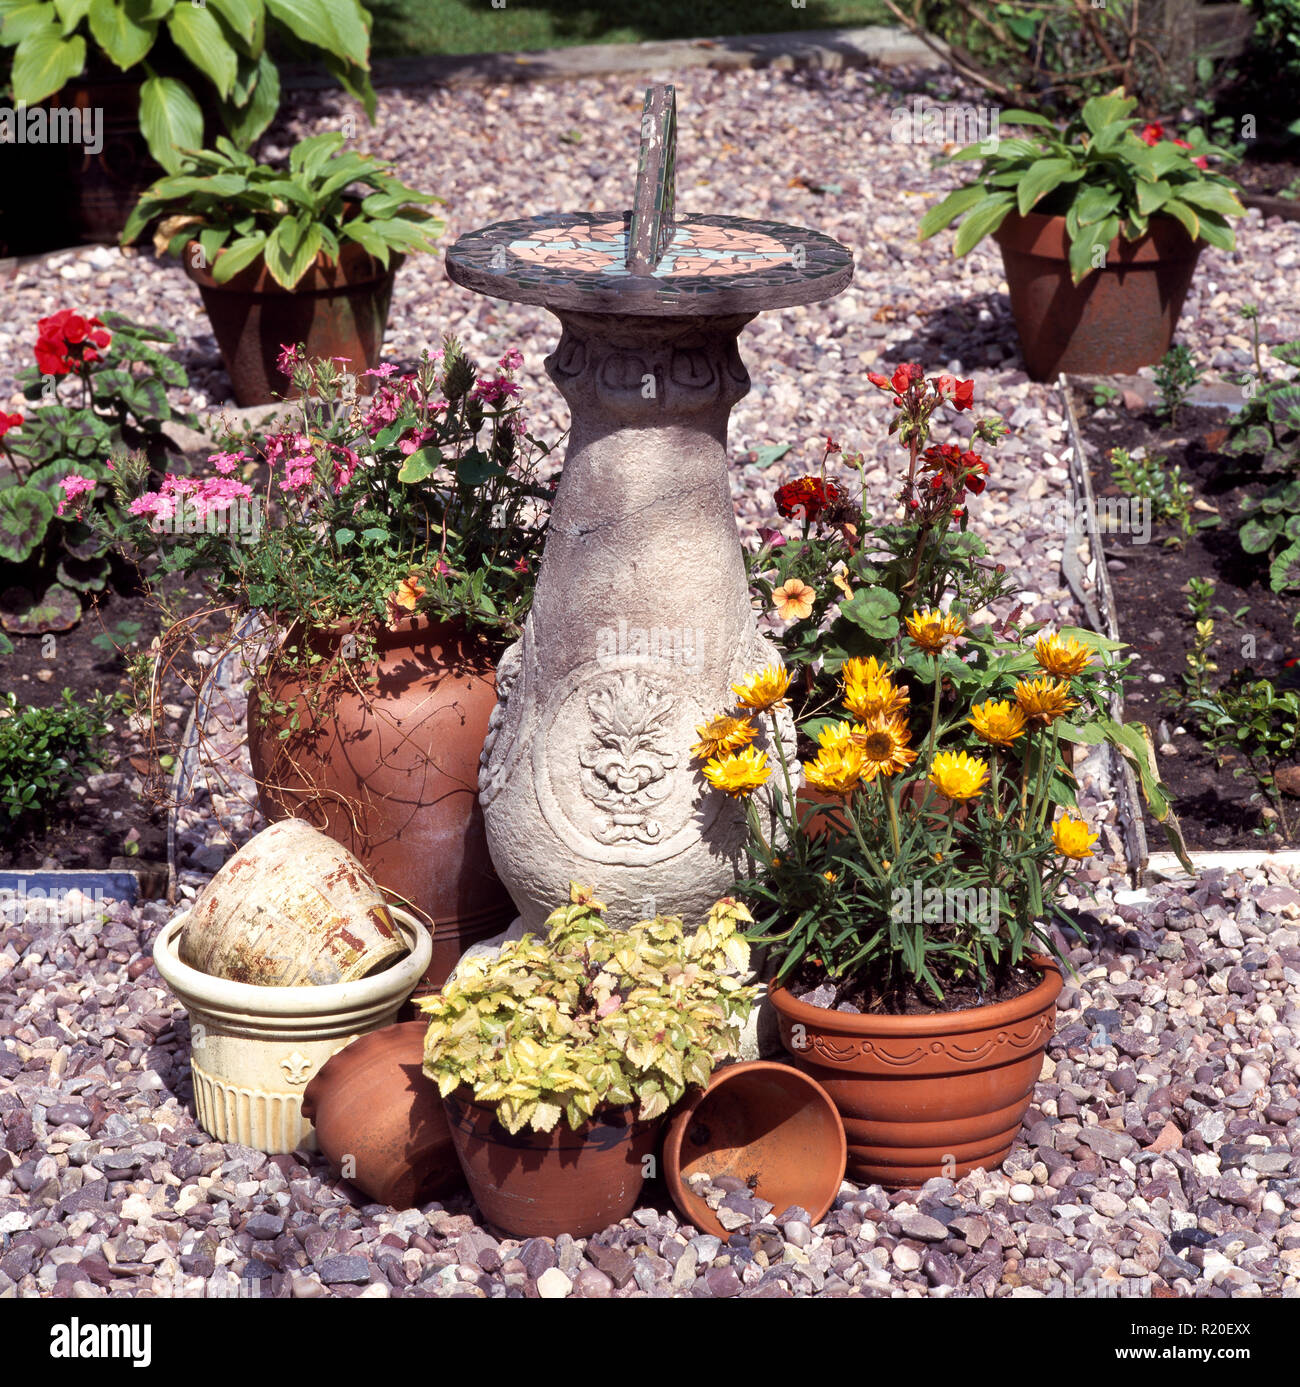 Sundial and pots of annuals on gravel Stock Photo